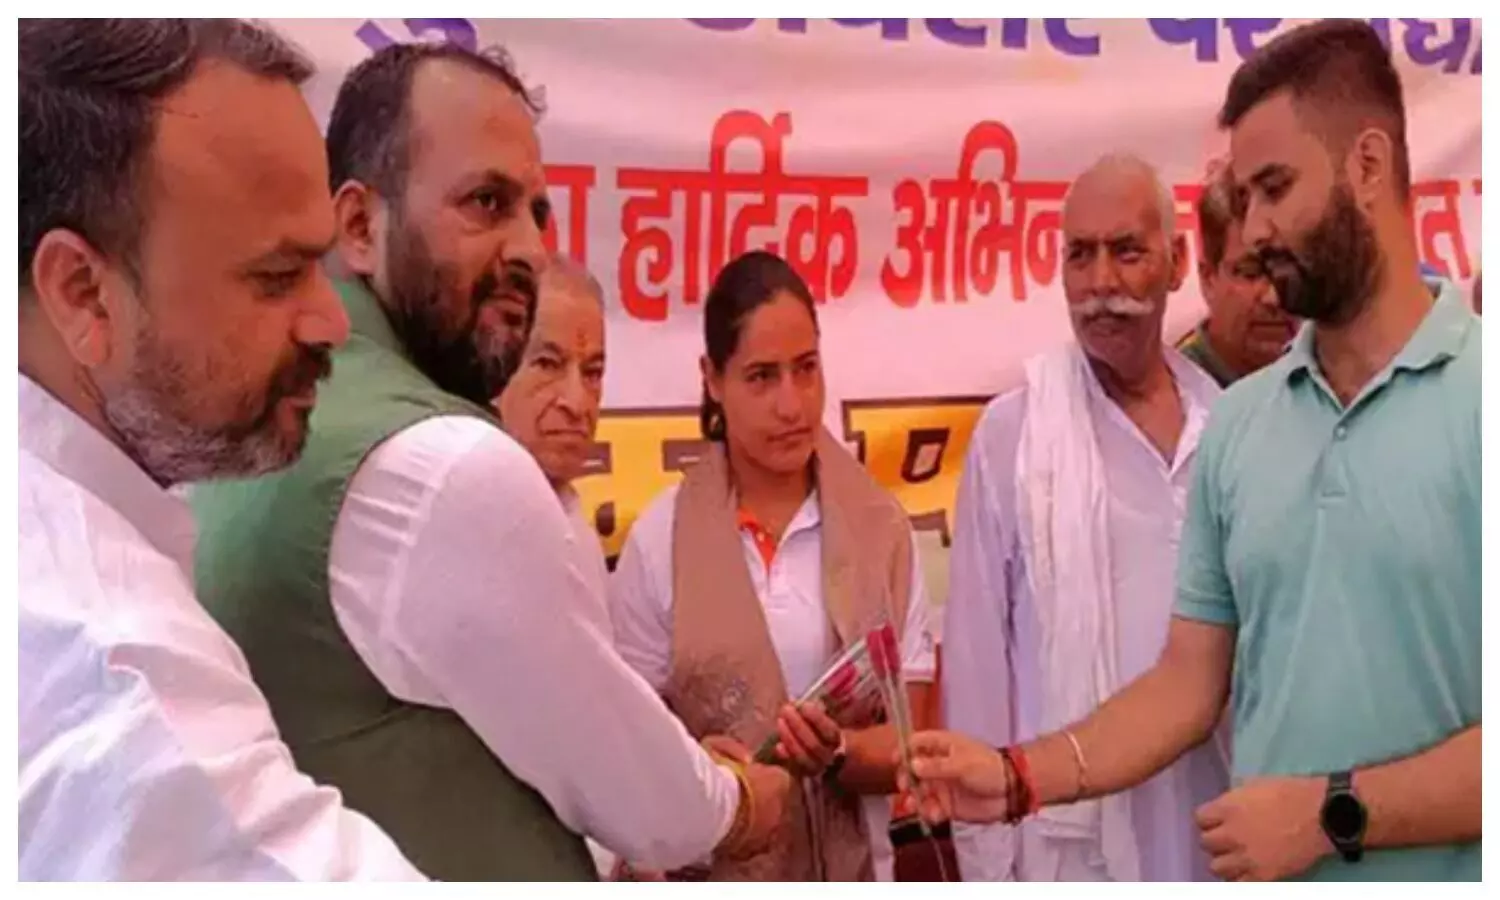 Annu Rani bronze medalist in Commonwealth Games received a warm welcome in Meerut